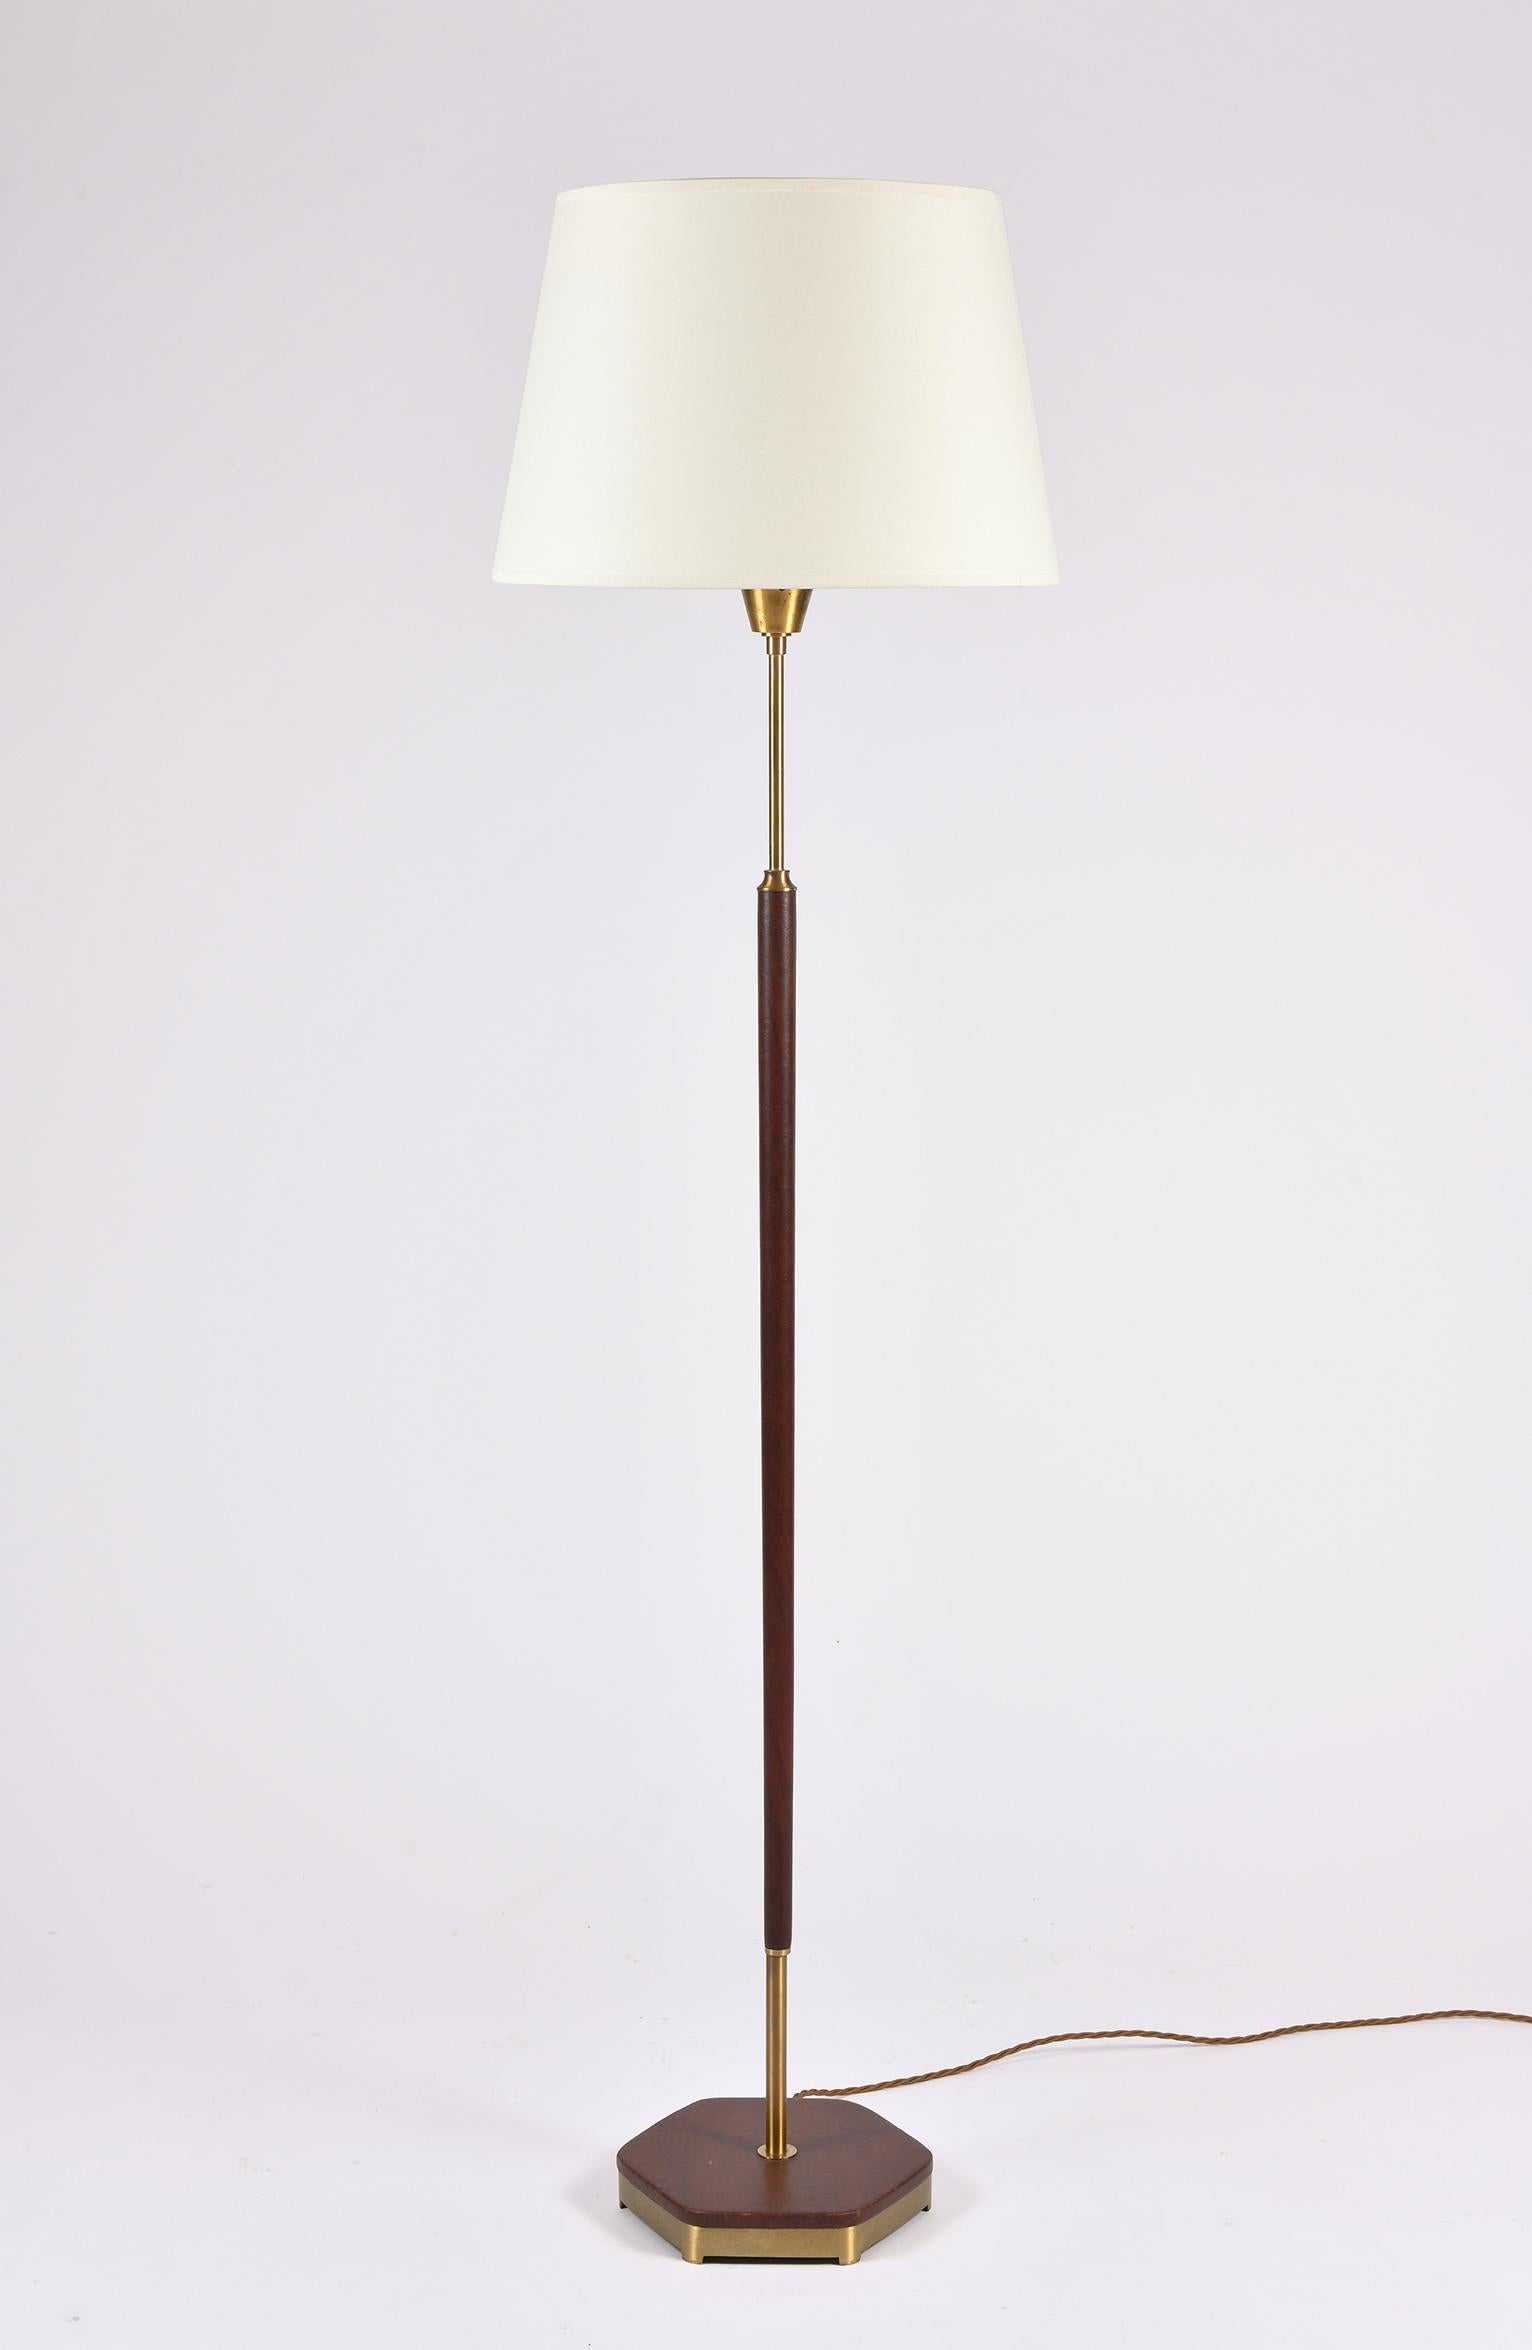 A brass and brown leather floor lamp
Sweden, circa 1950.